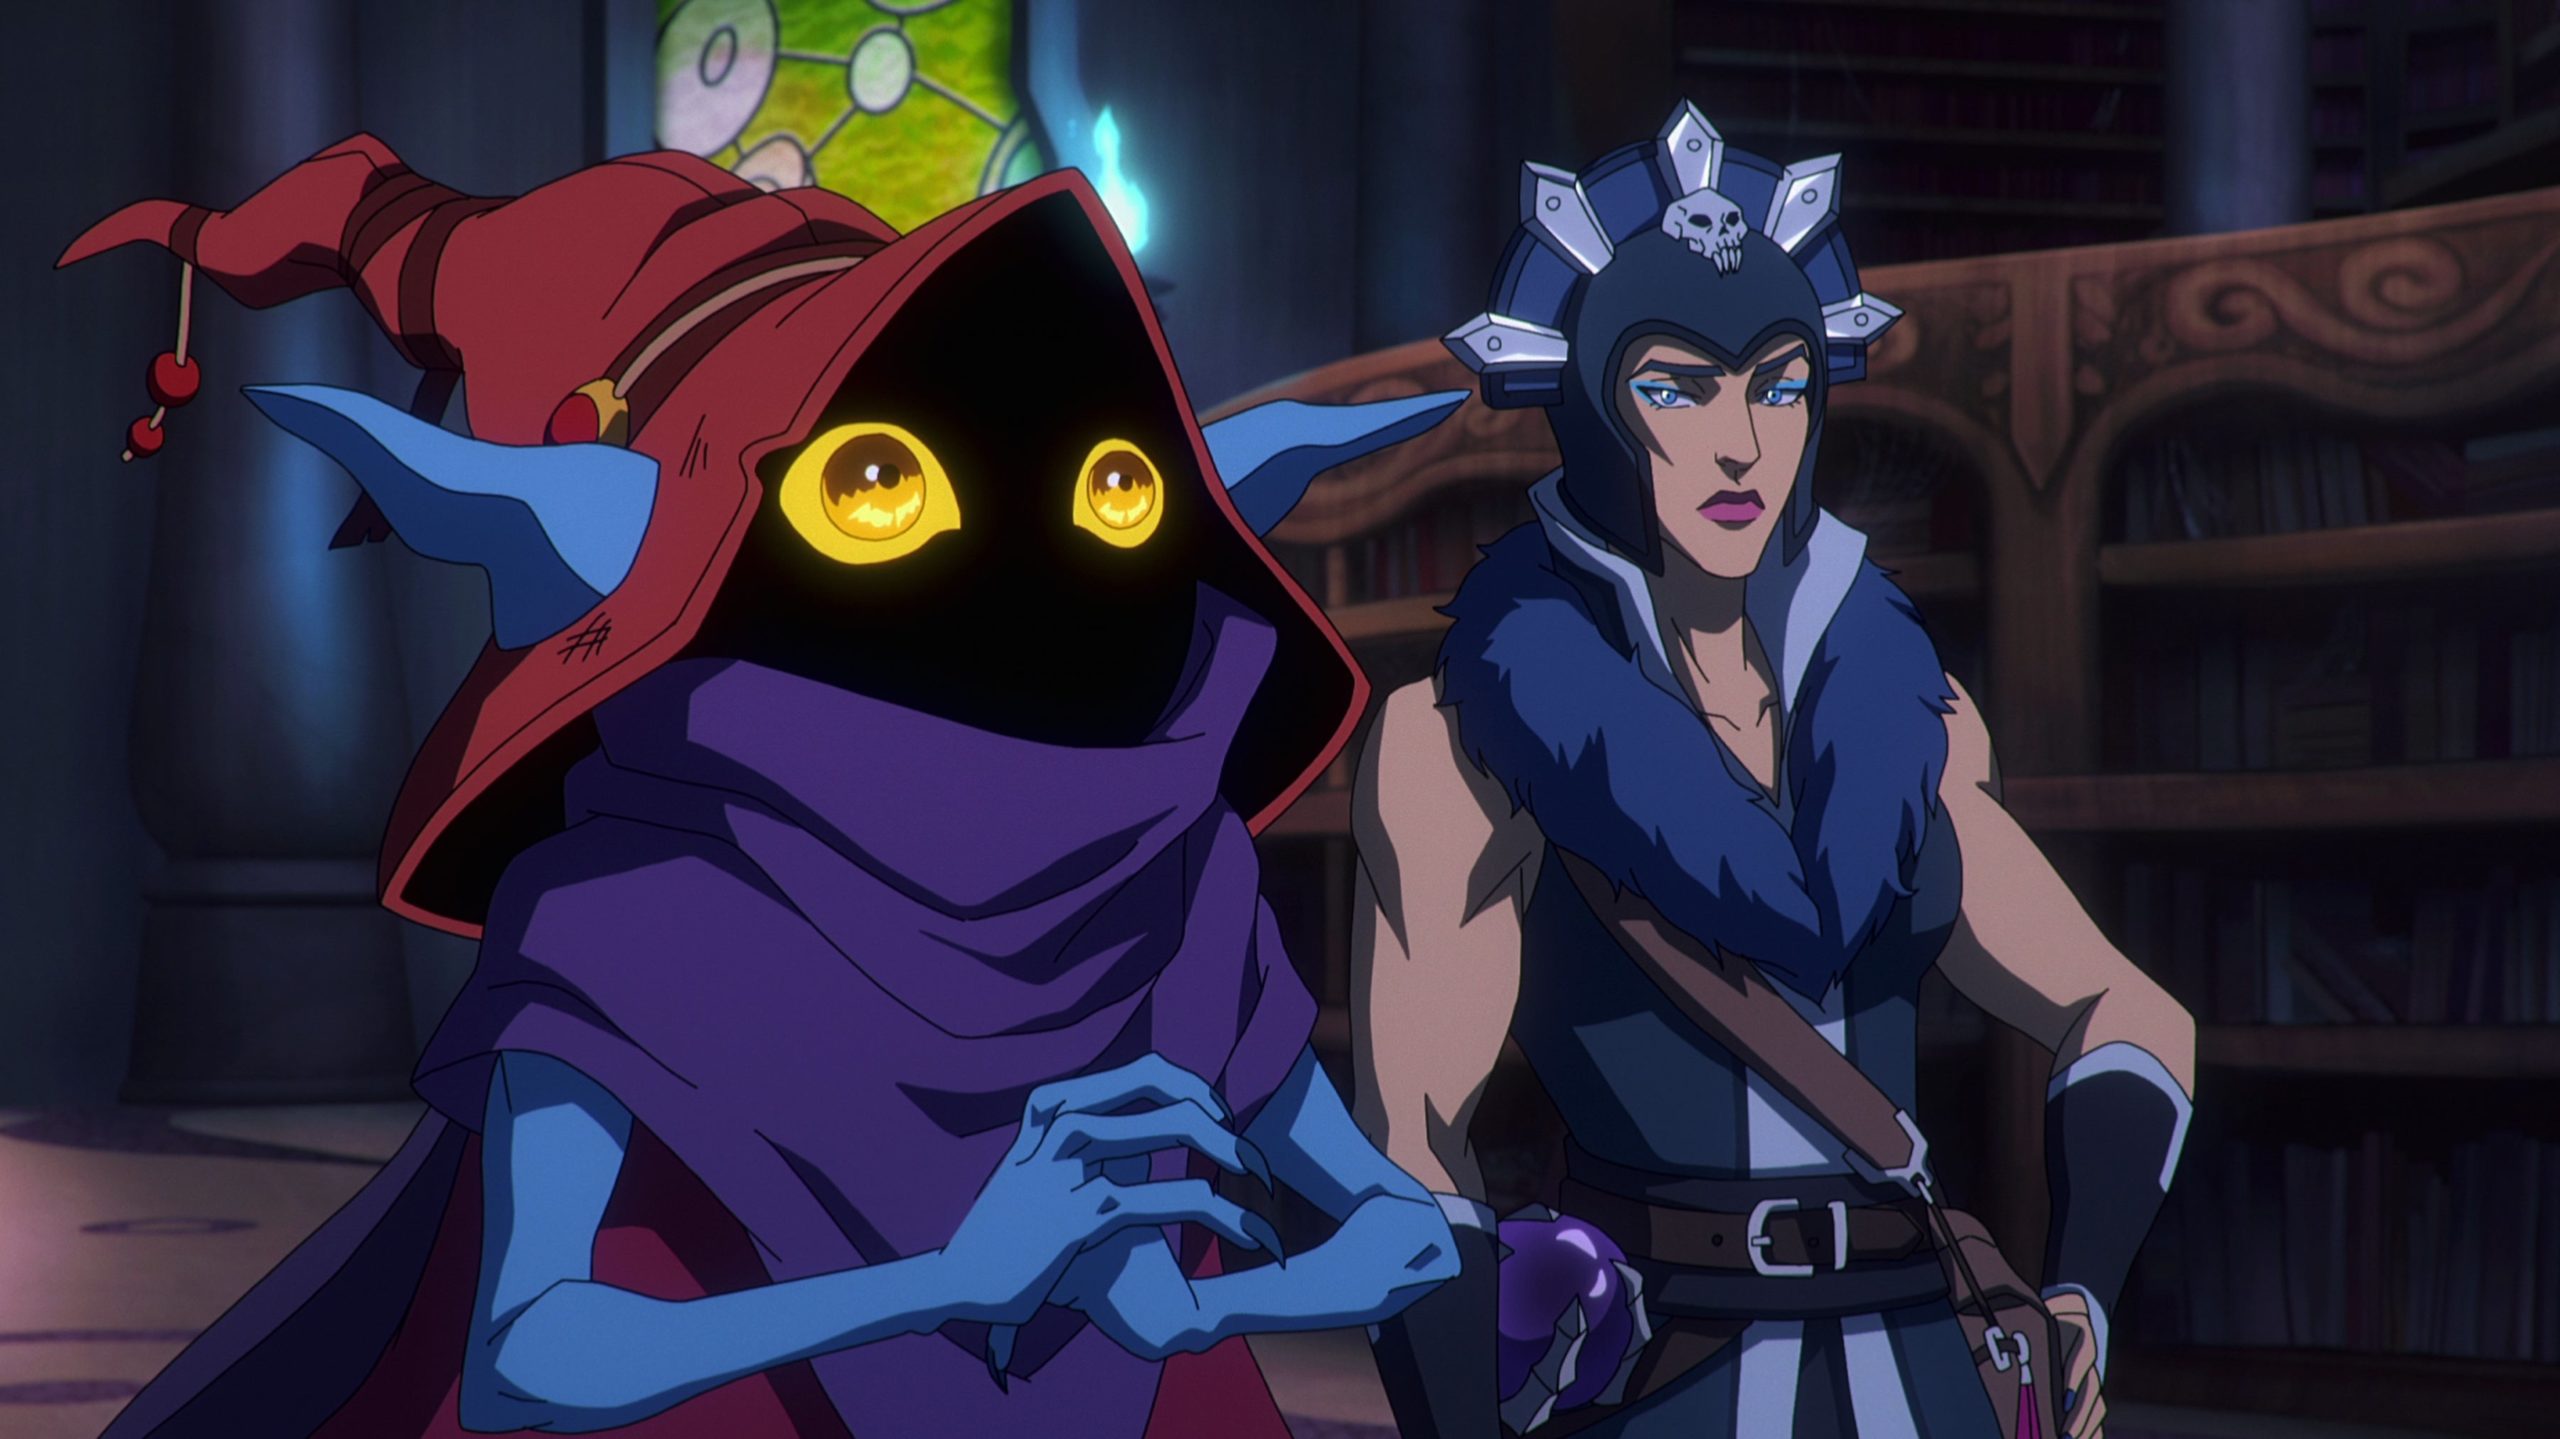 Somehow, Orko stars in one of the best scenes in the entire series. (Image: Netflix)